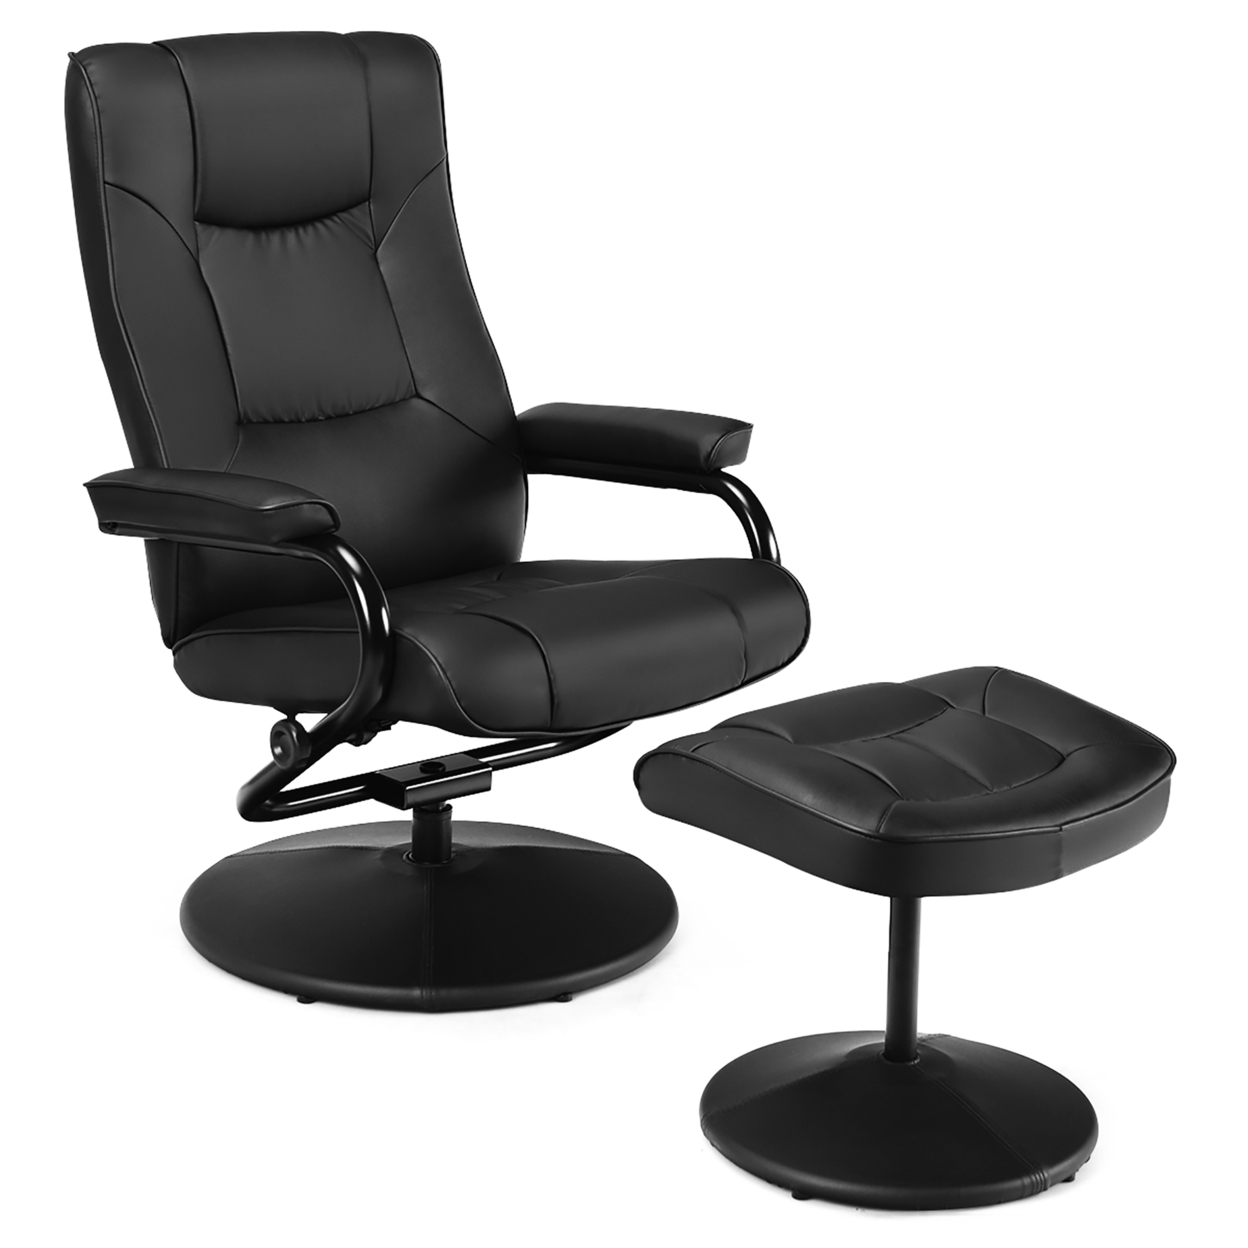 Costway Recliner Chair Swivel Pu, Black Leather Accent Chair With Ottoman